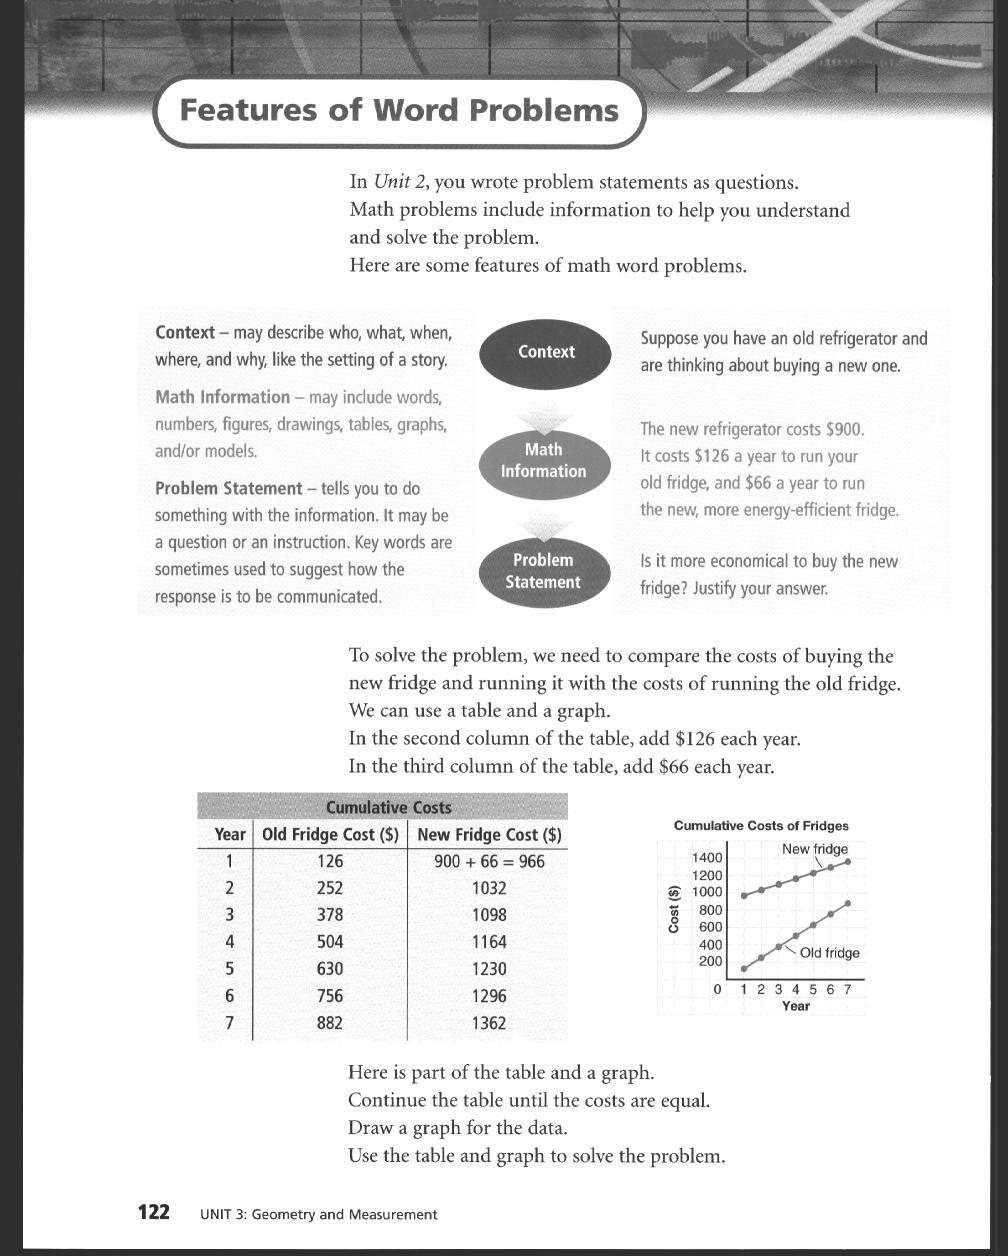 Features of Word Problems In Unit 2, you wrote problem statements as questions. Math problems include information to help you understand and solve the problem.